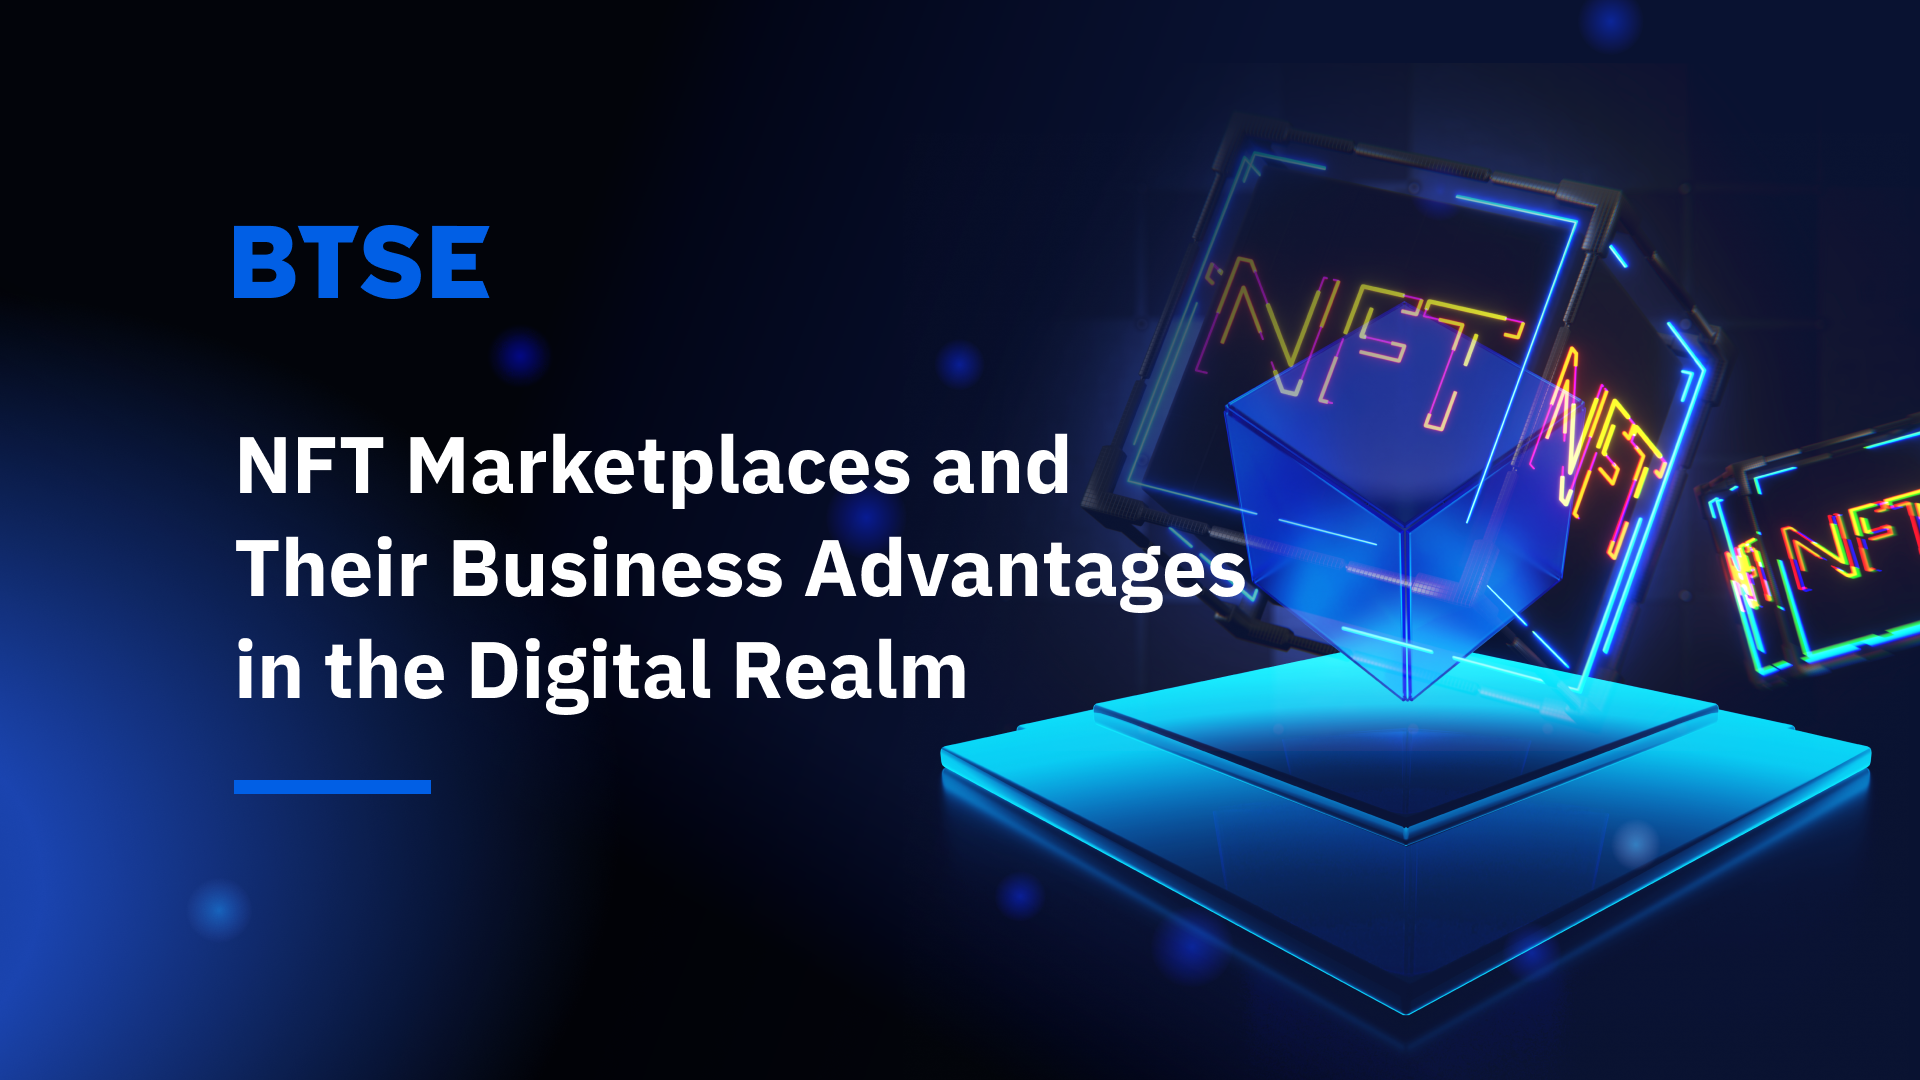 NFT marketplaces in the digital realm